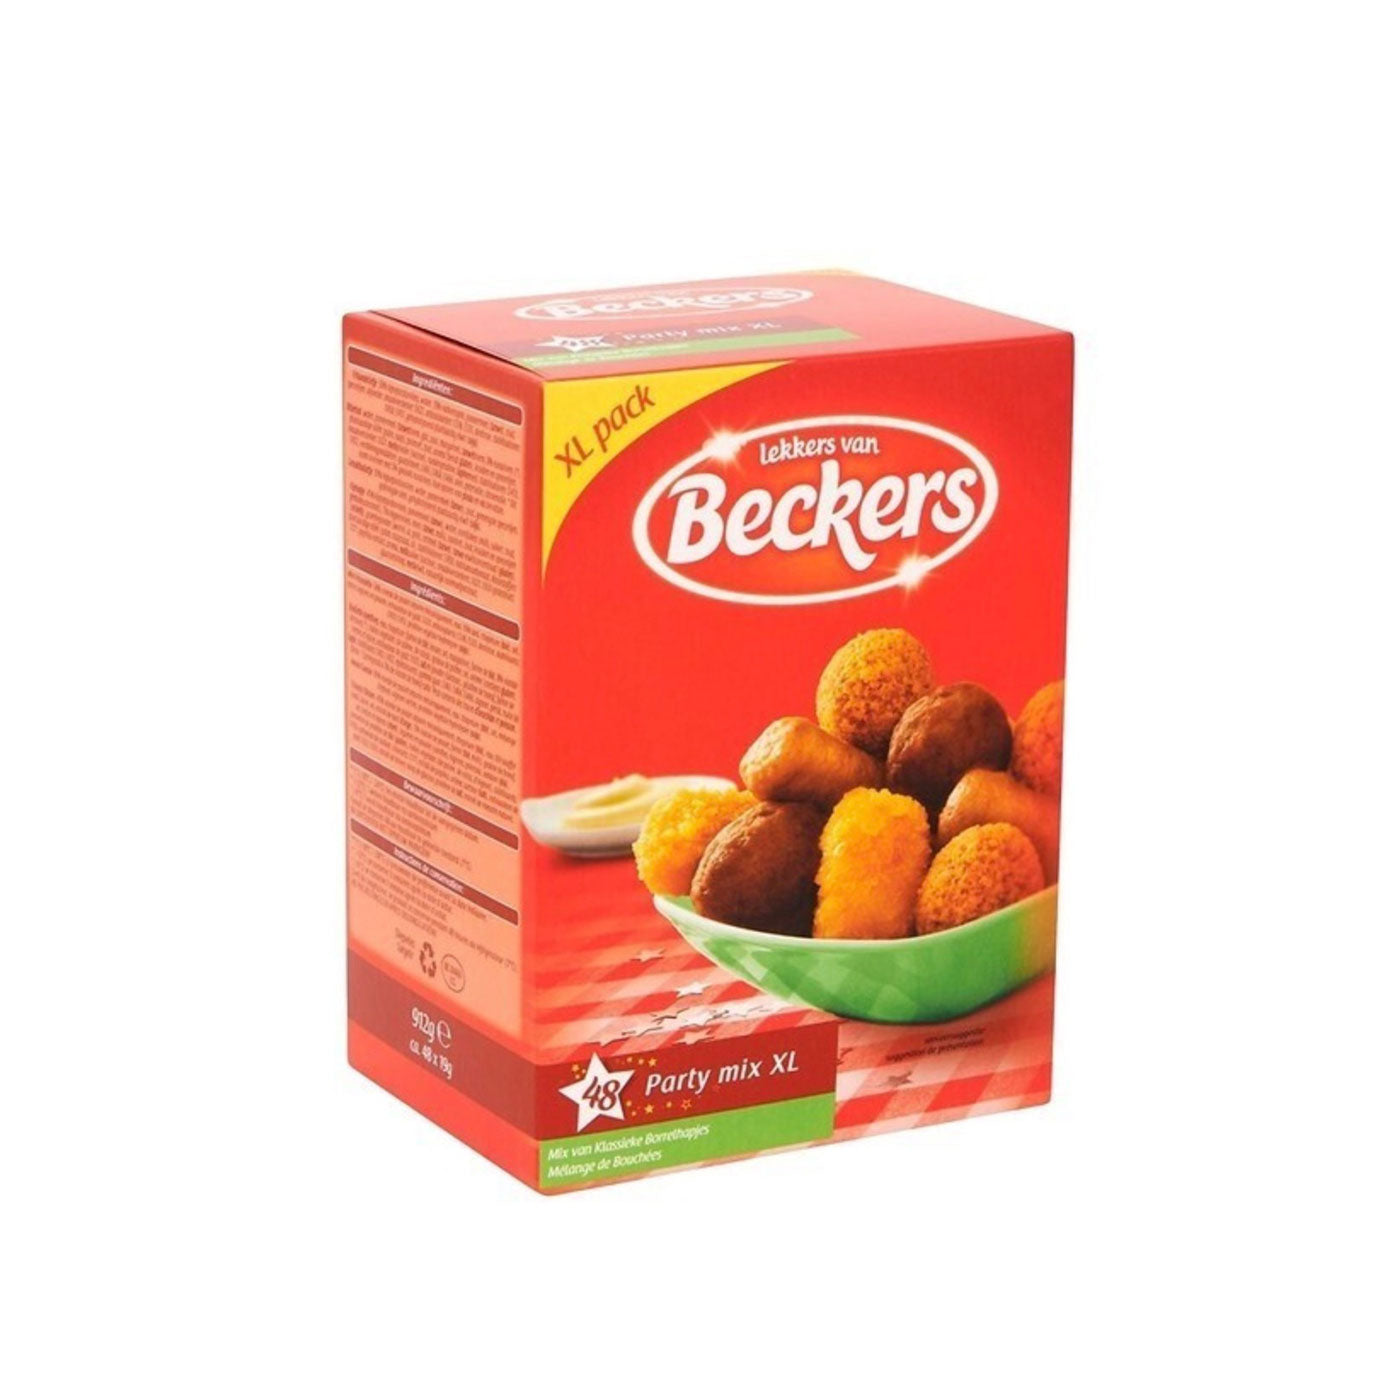 Beckers Party Mix - Frikandelles, Chicken Crockers, Beef Bitterballs & Spicy Minced Meat Balls 48x19g - Image 3